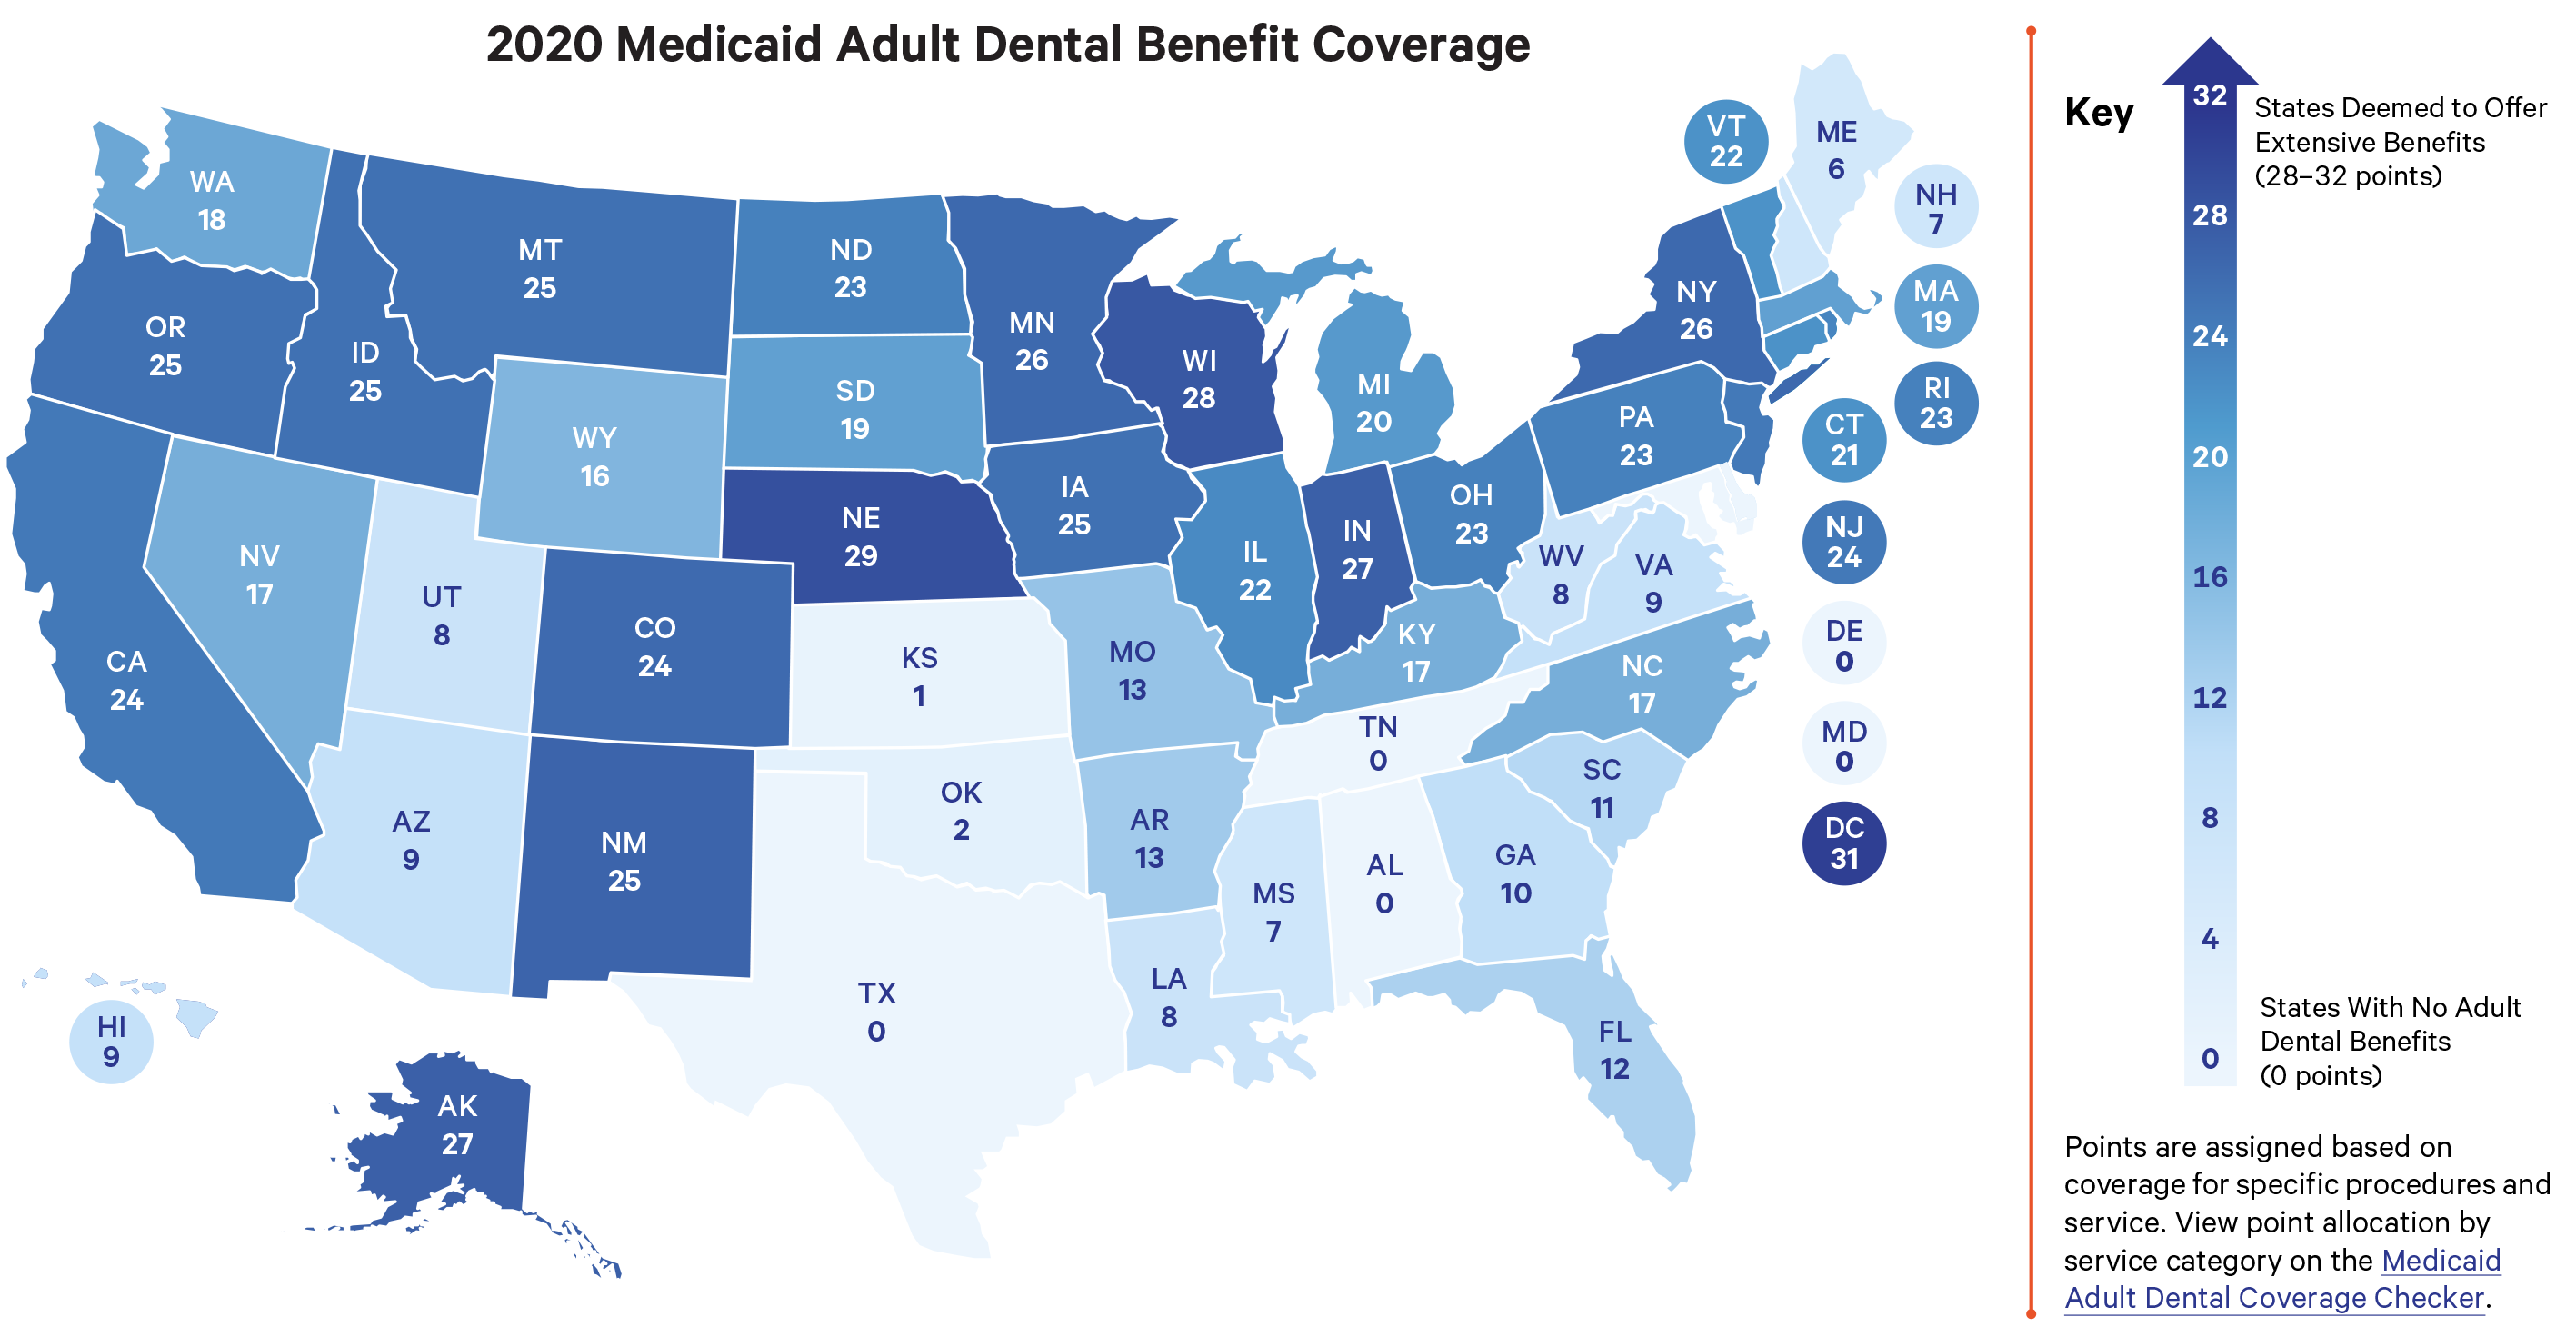 Adult Dental Medicaid Coverage Checker CareQuest Institute